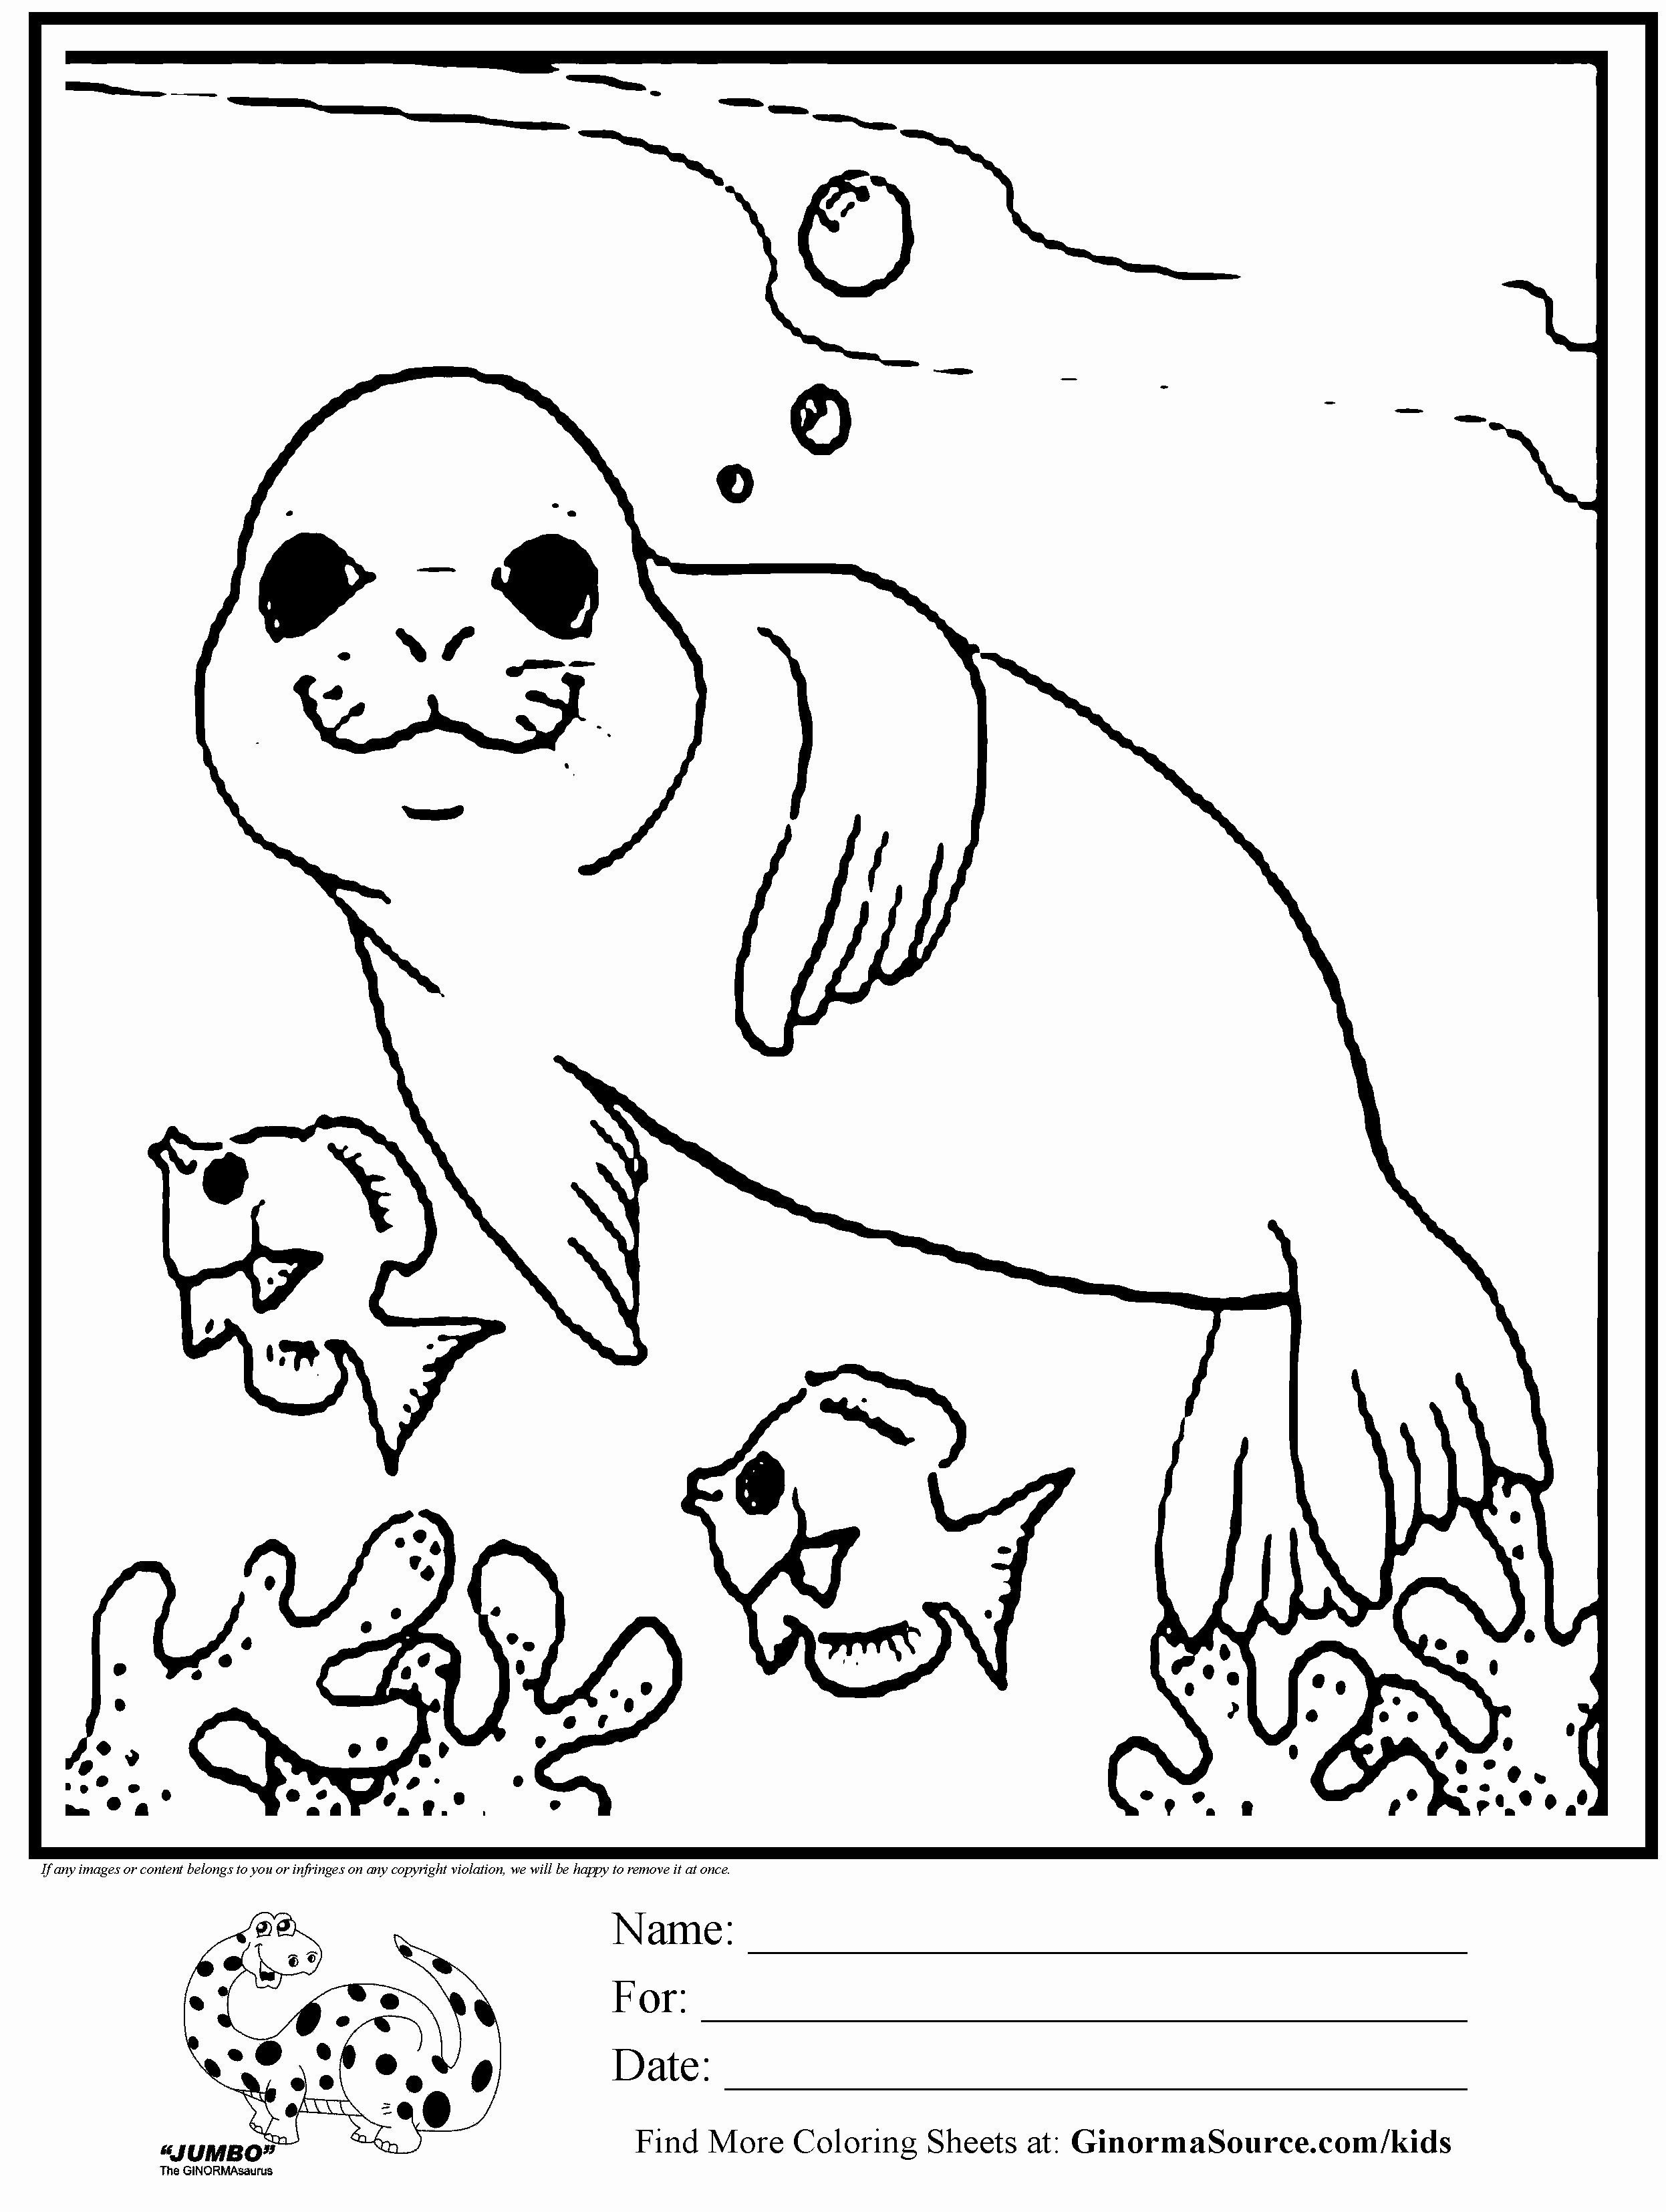 New Zealand Flag Coloring Page New Zealand Animals Coloring Pages Best Of Best Engaged Animals